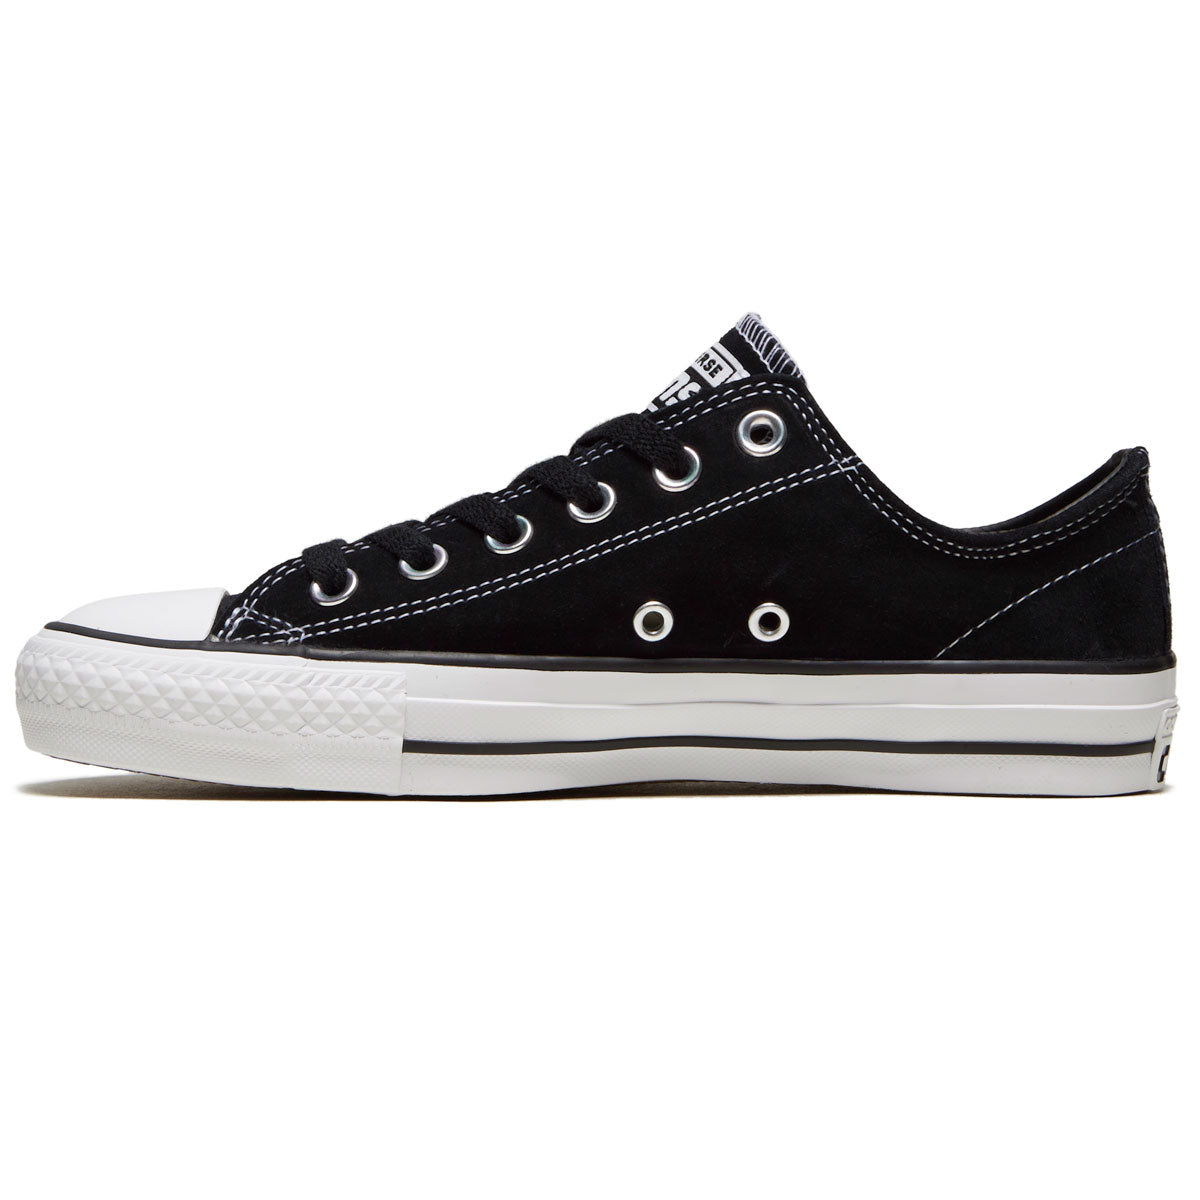 Converse Chuck Taylor All Star Pro Suede Ox Shoes - Black/Black/White, – CCS